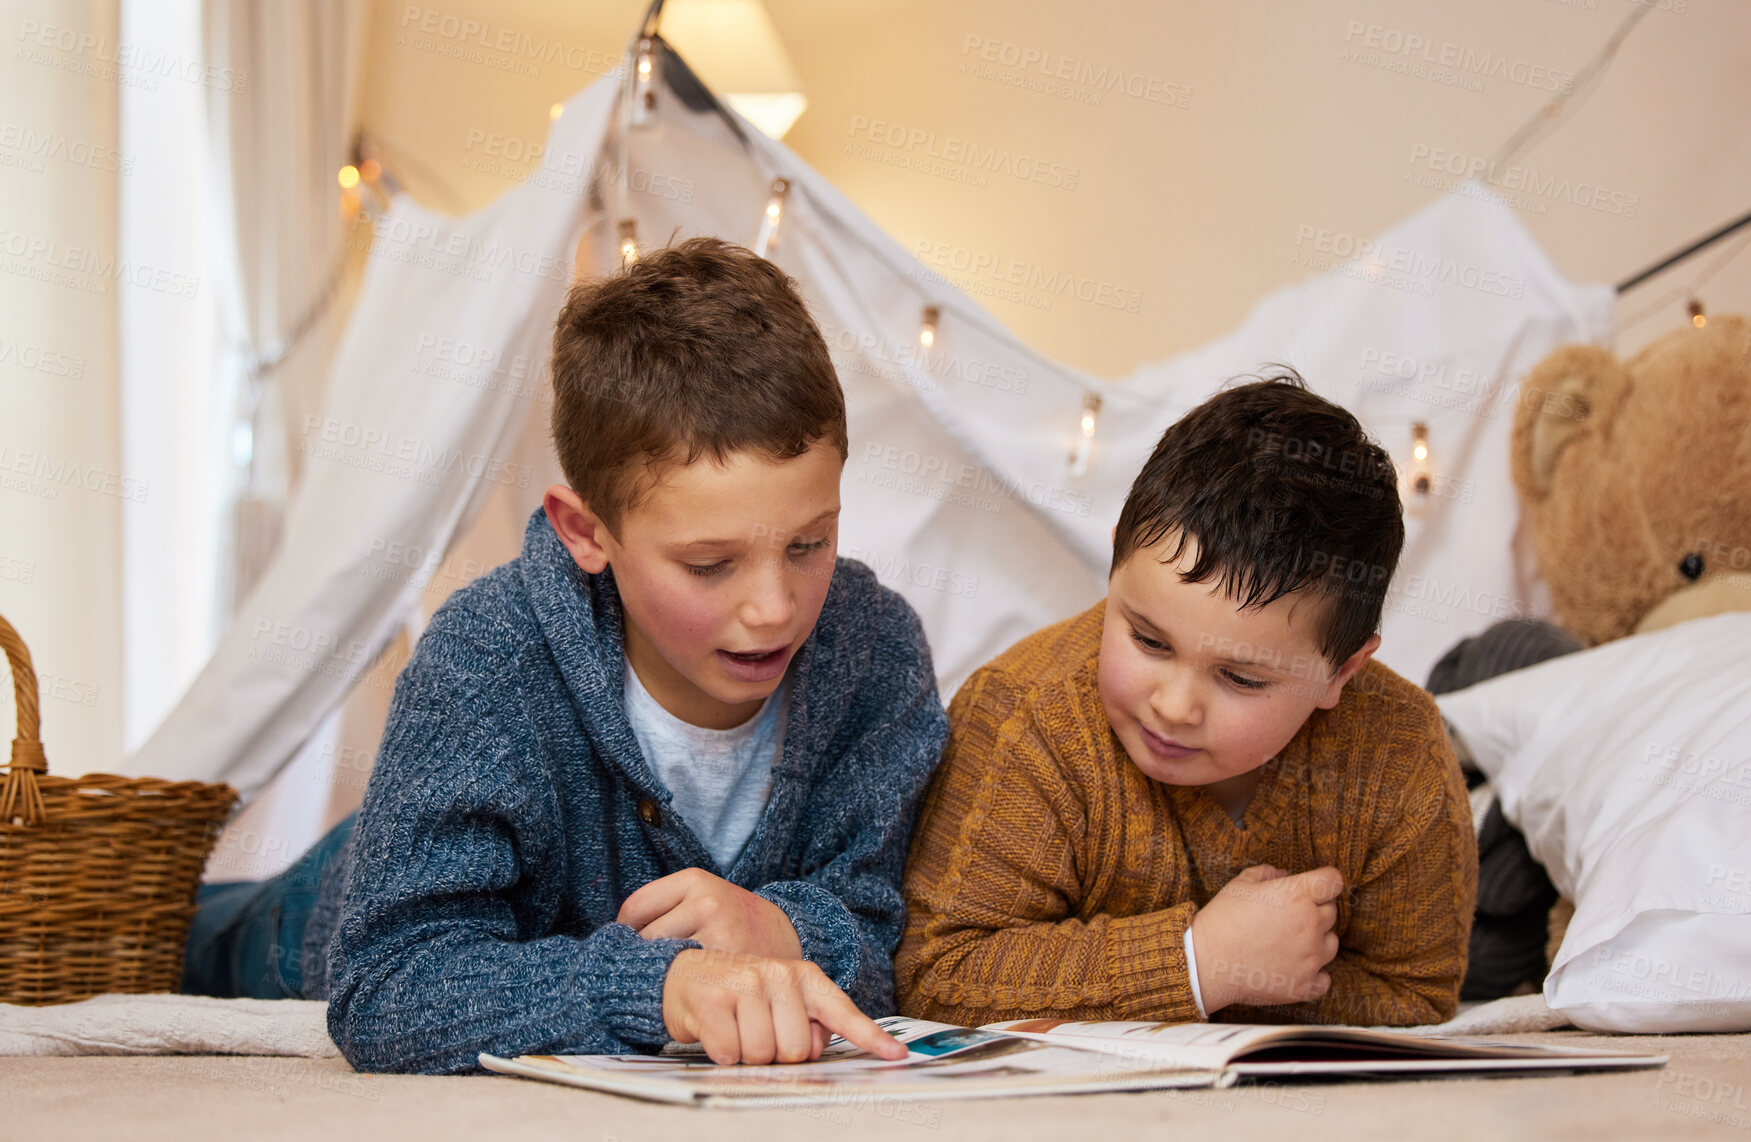 Buy stock photo Shot of two brothers reading a book together under a blanket fort at home